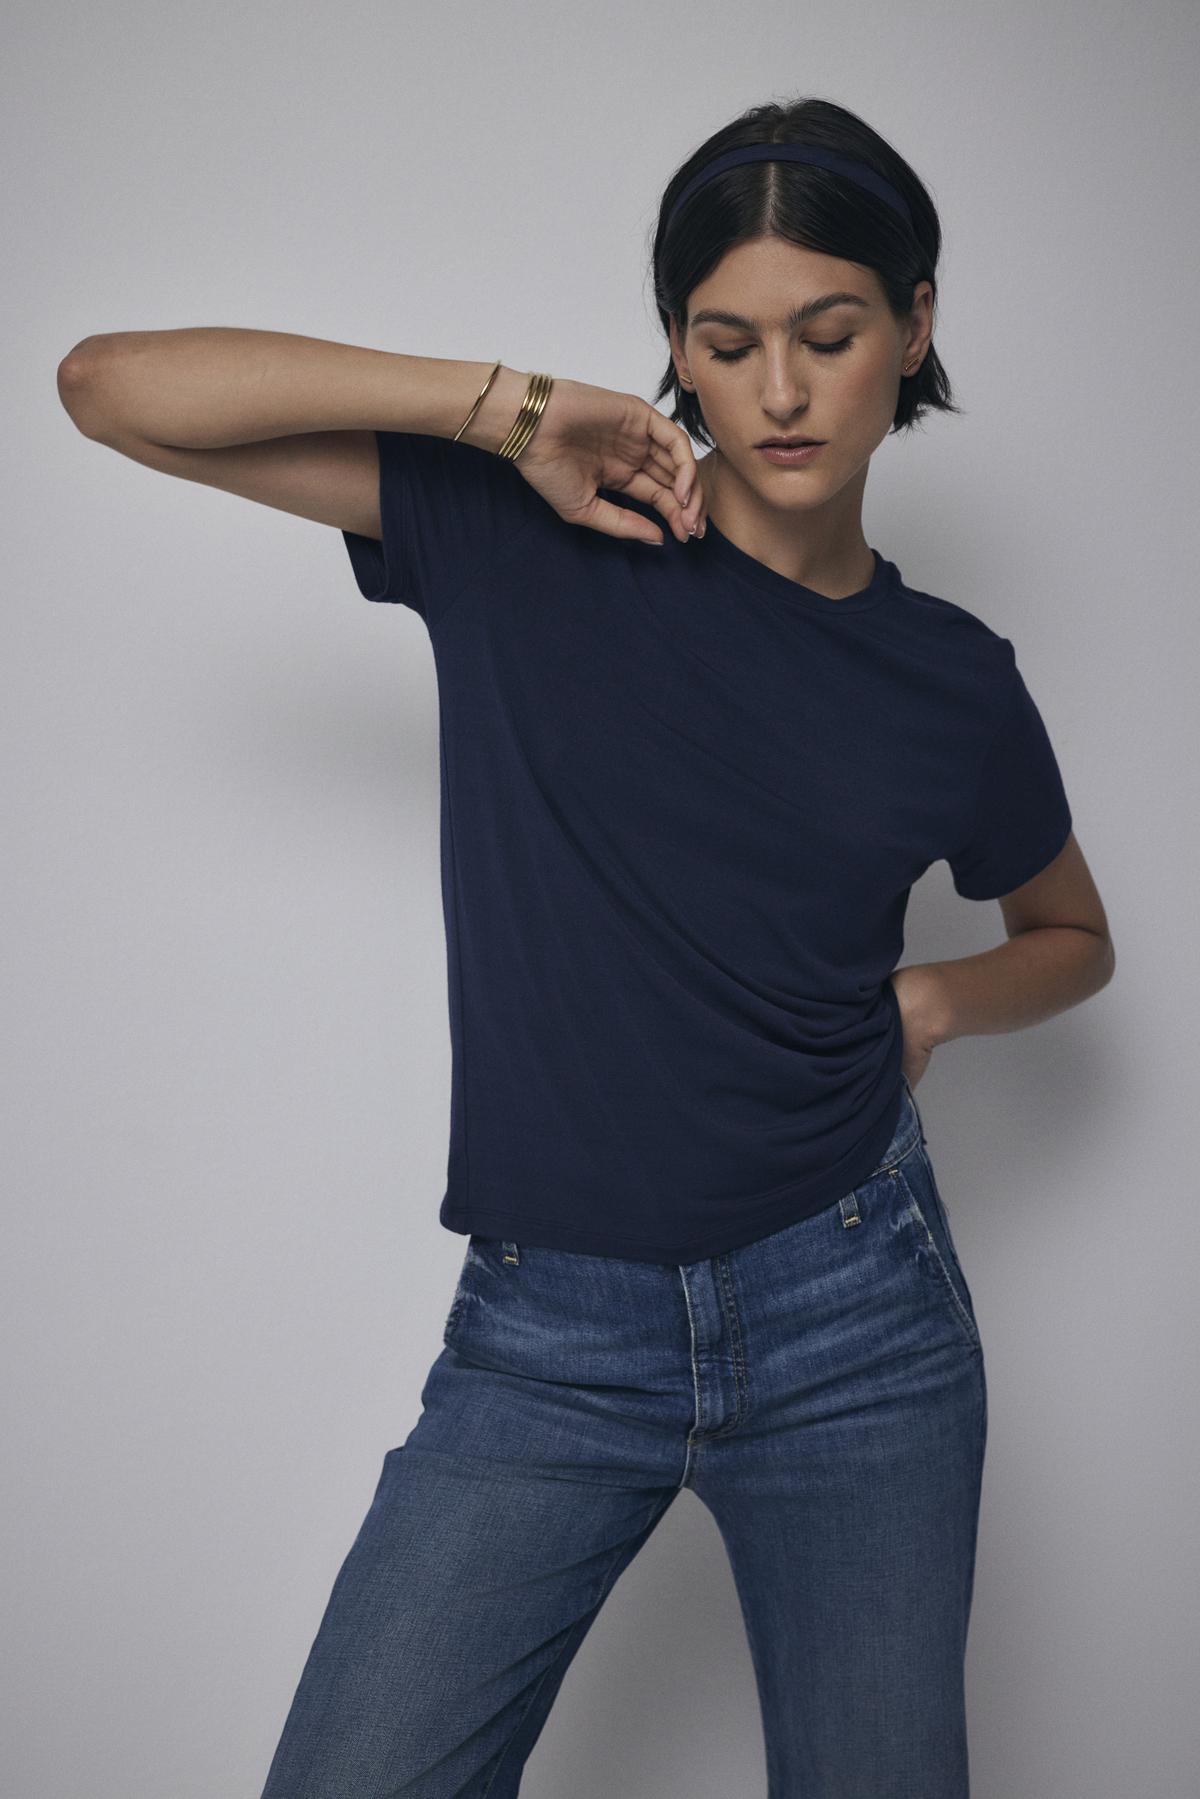 A woman in a navy blue Velvet by Jenny Graham Solana Tee and jeans poses with her hand on her waist, looking downward.-36463663808705